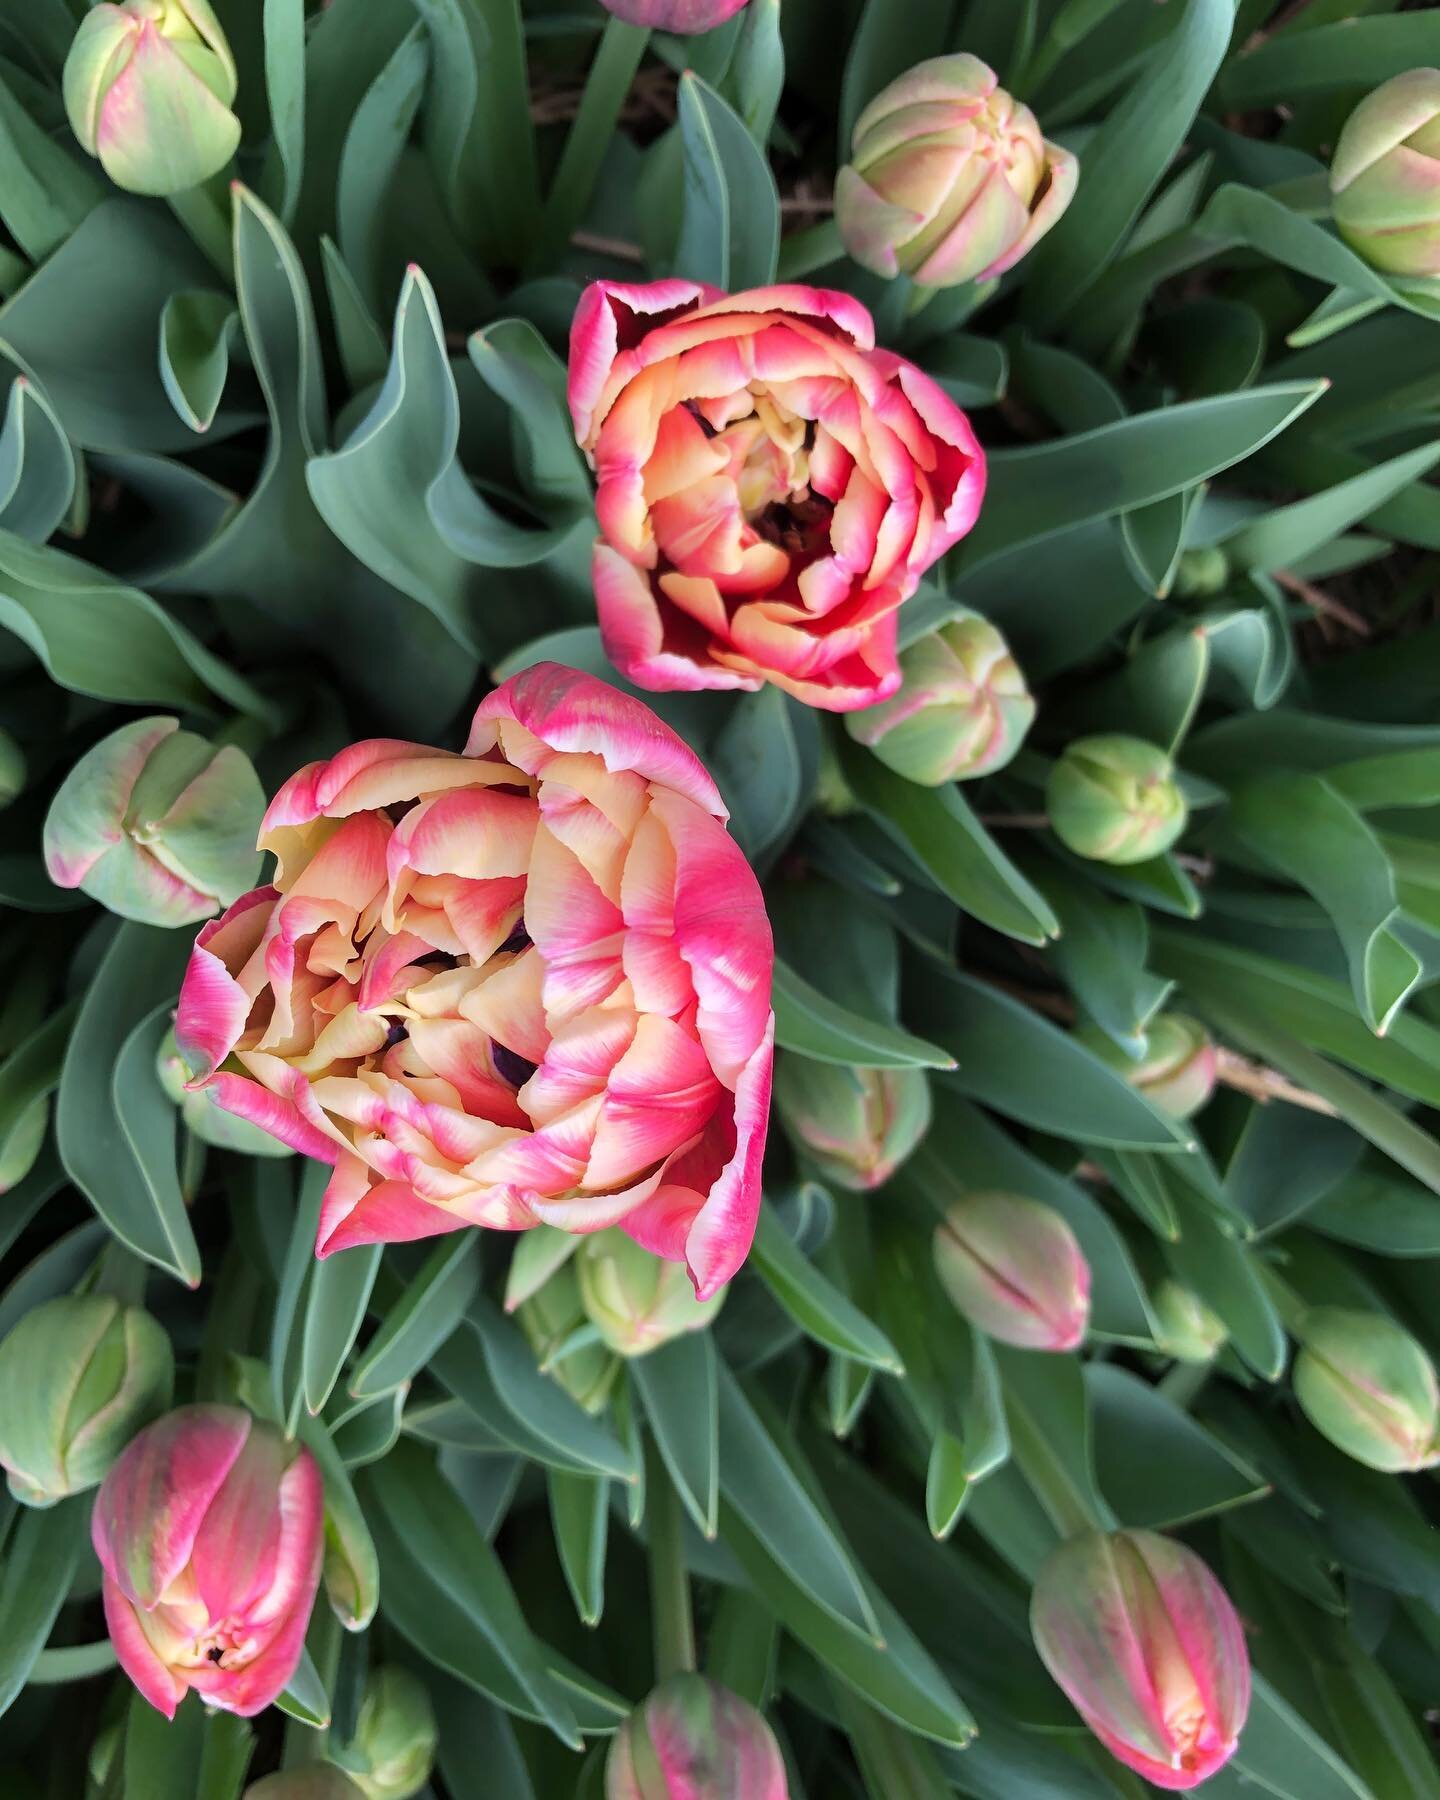 Columbus Tulips are starting to bloom! Can you believe these are tulips?

I&rsquo;ll be set up at @thebluetruckboutique&rsquo;s Girl&rsquo;s Night this Wednesday from 7 to 9 pm. Pop by for some fresh flowers, shopping and fun!